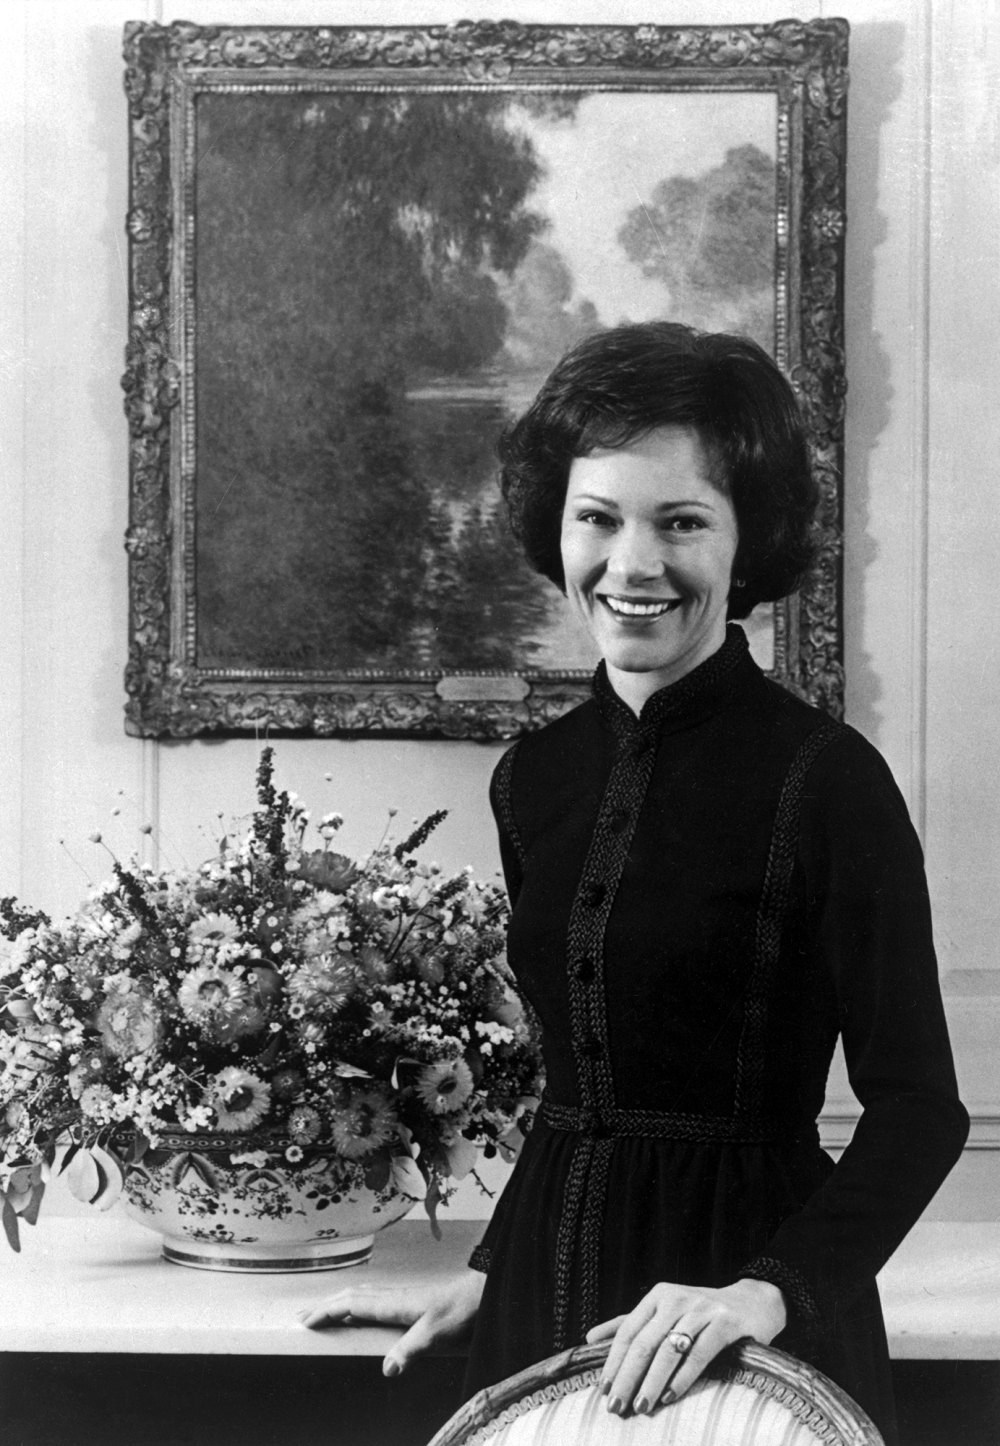 Former First Lady Rosalynn Carter Dies 'Peacefully' at 96 With Family 'By Her Side'